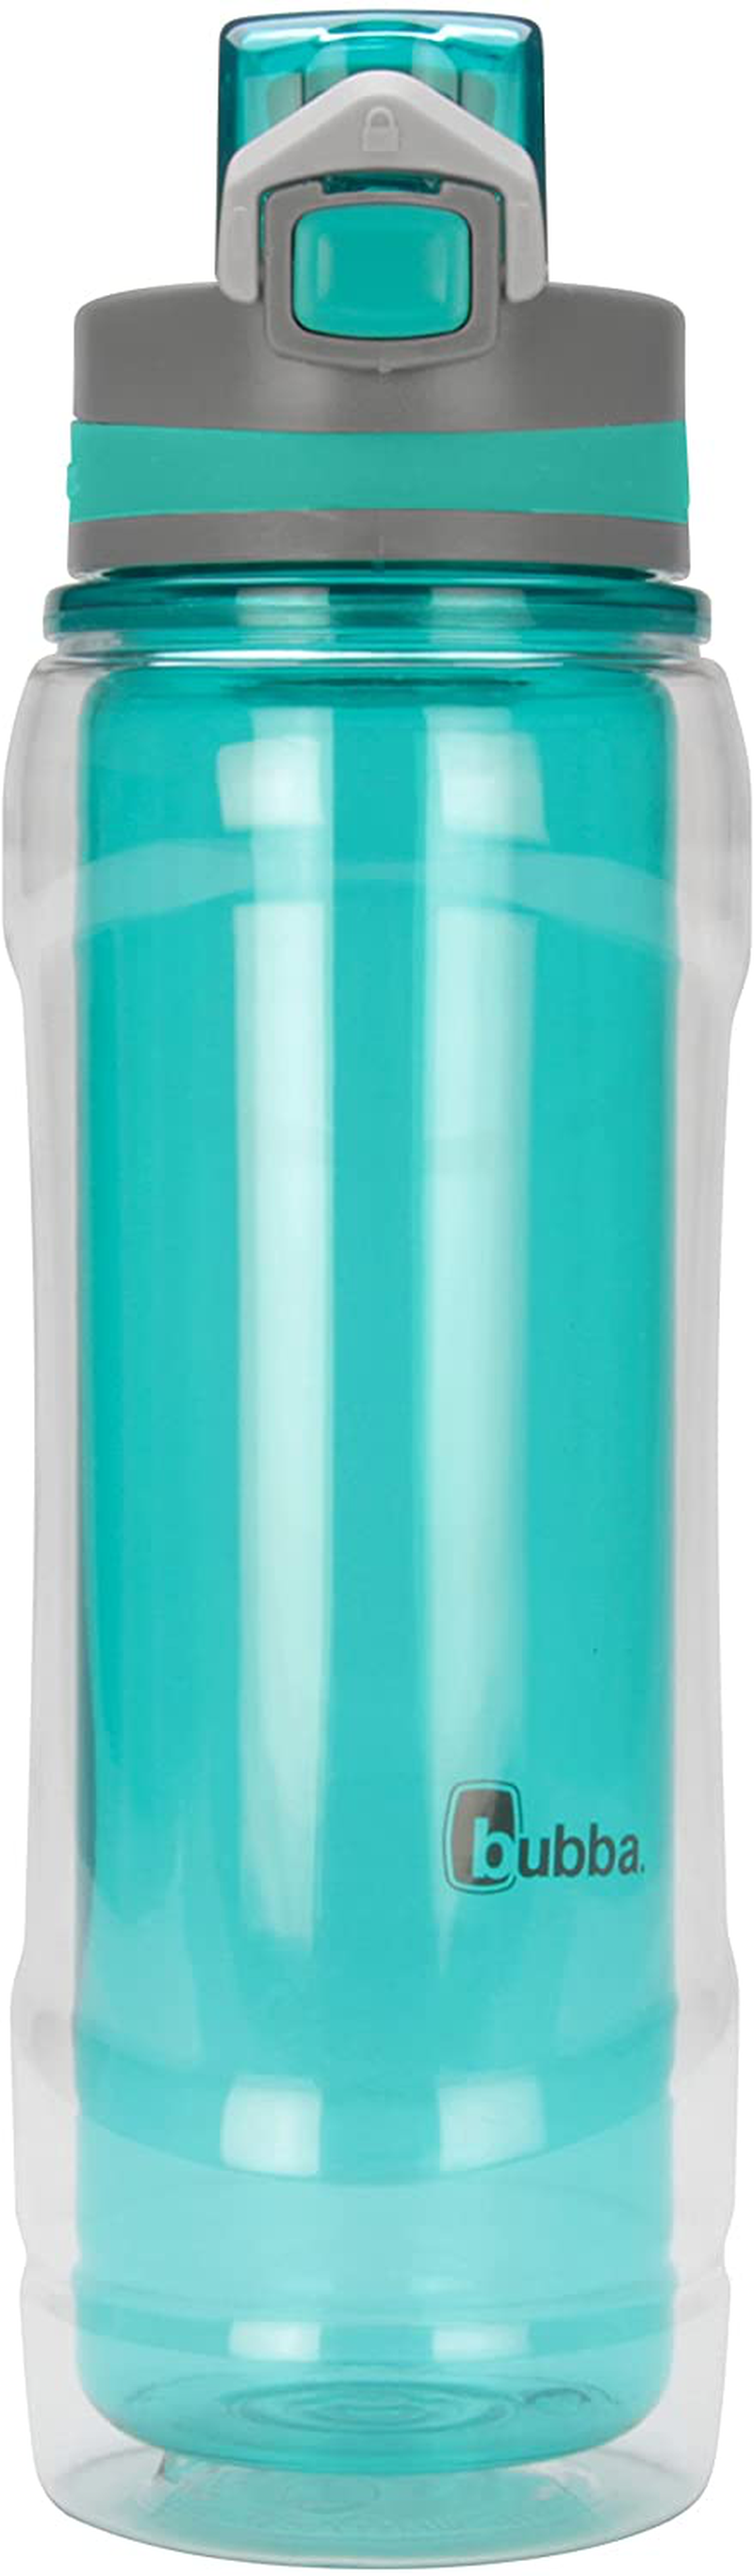 bubba Flo Duo Dual-Wall Insulated Water Bottle, 24 oz., Island Teal